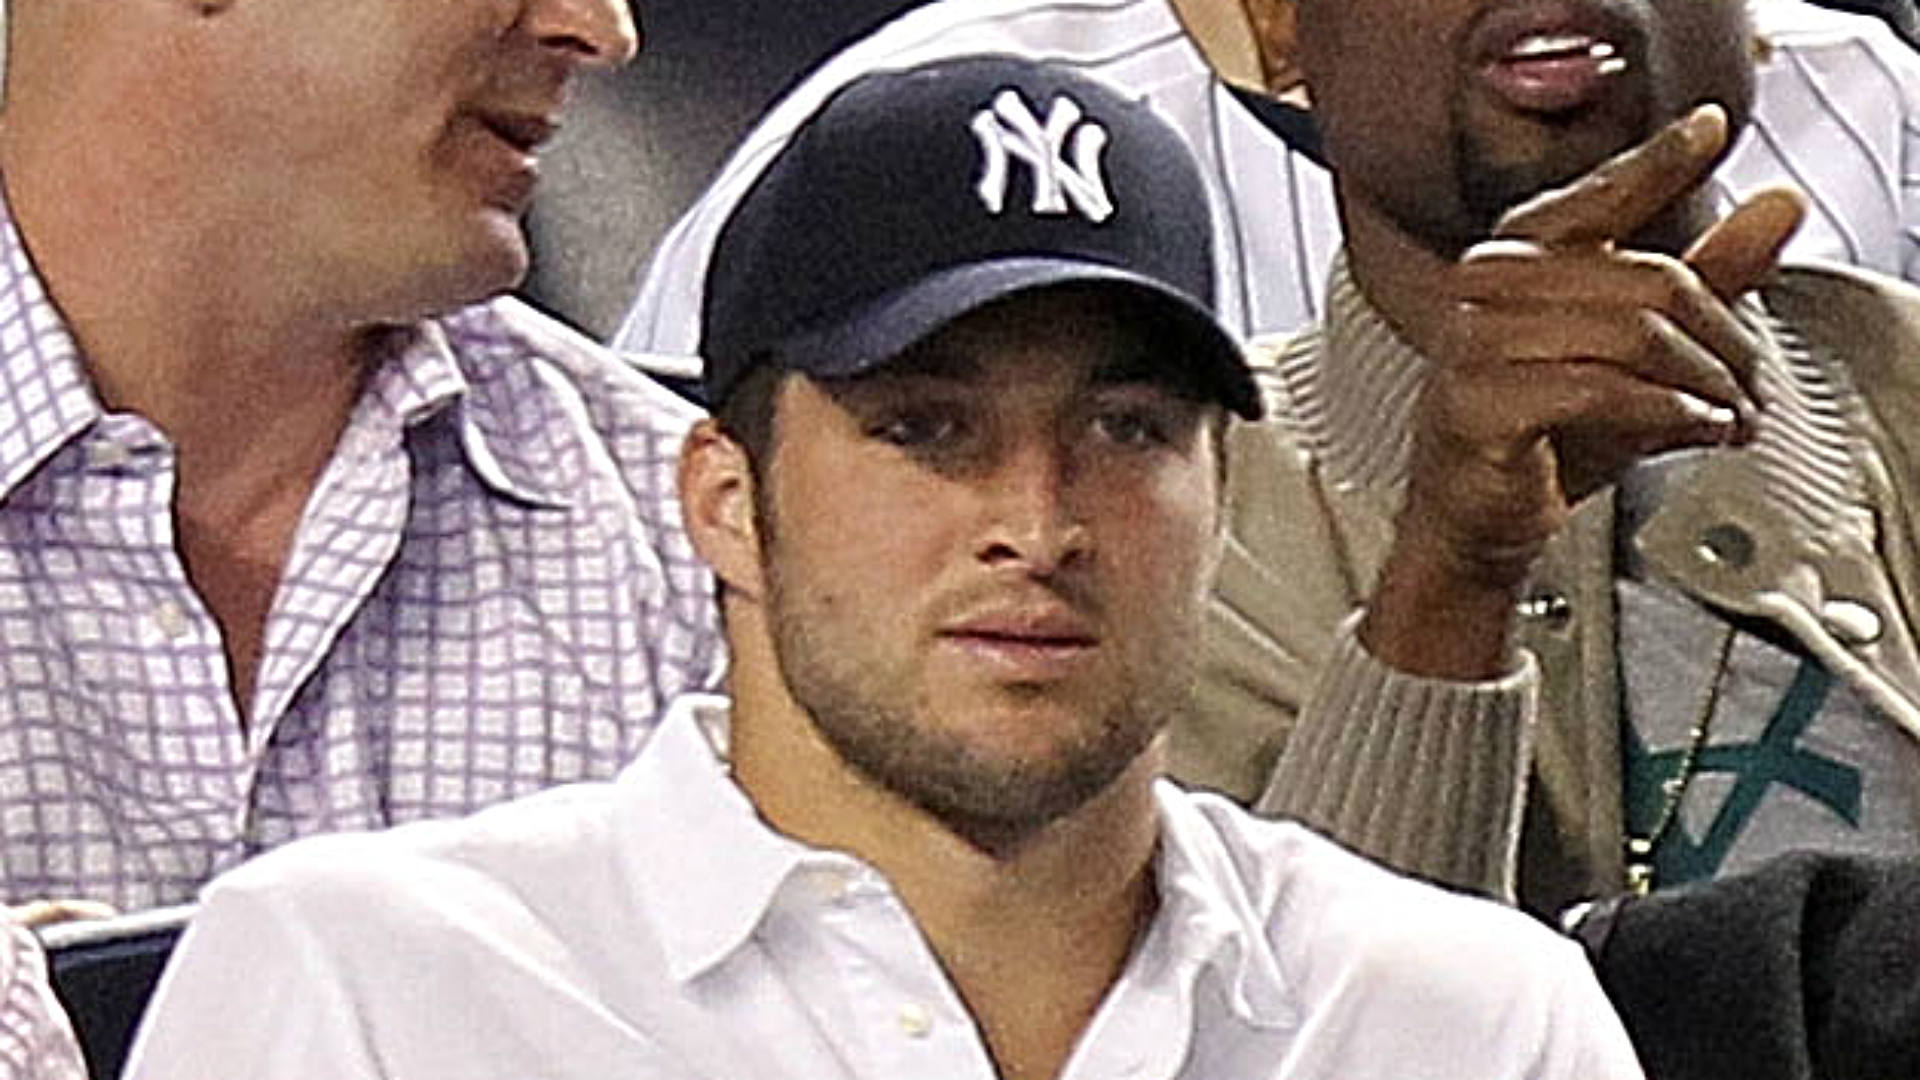 Tim Tebow's baseball career could get start in Venezuela, report says | Sporting News ...1920 x 1080